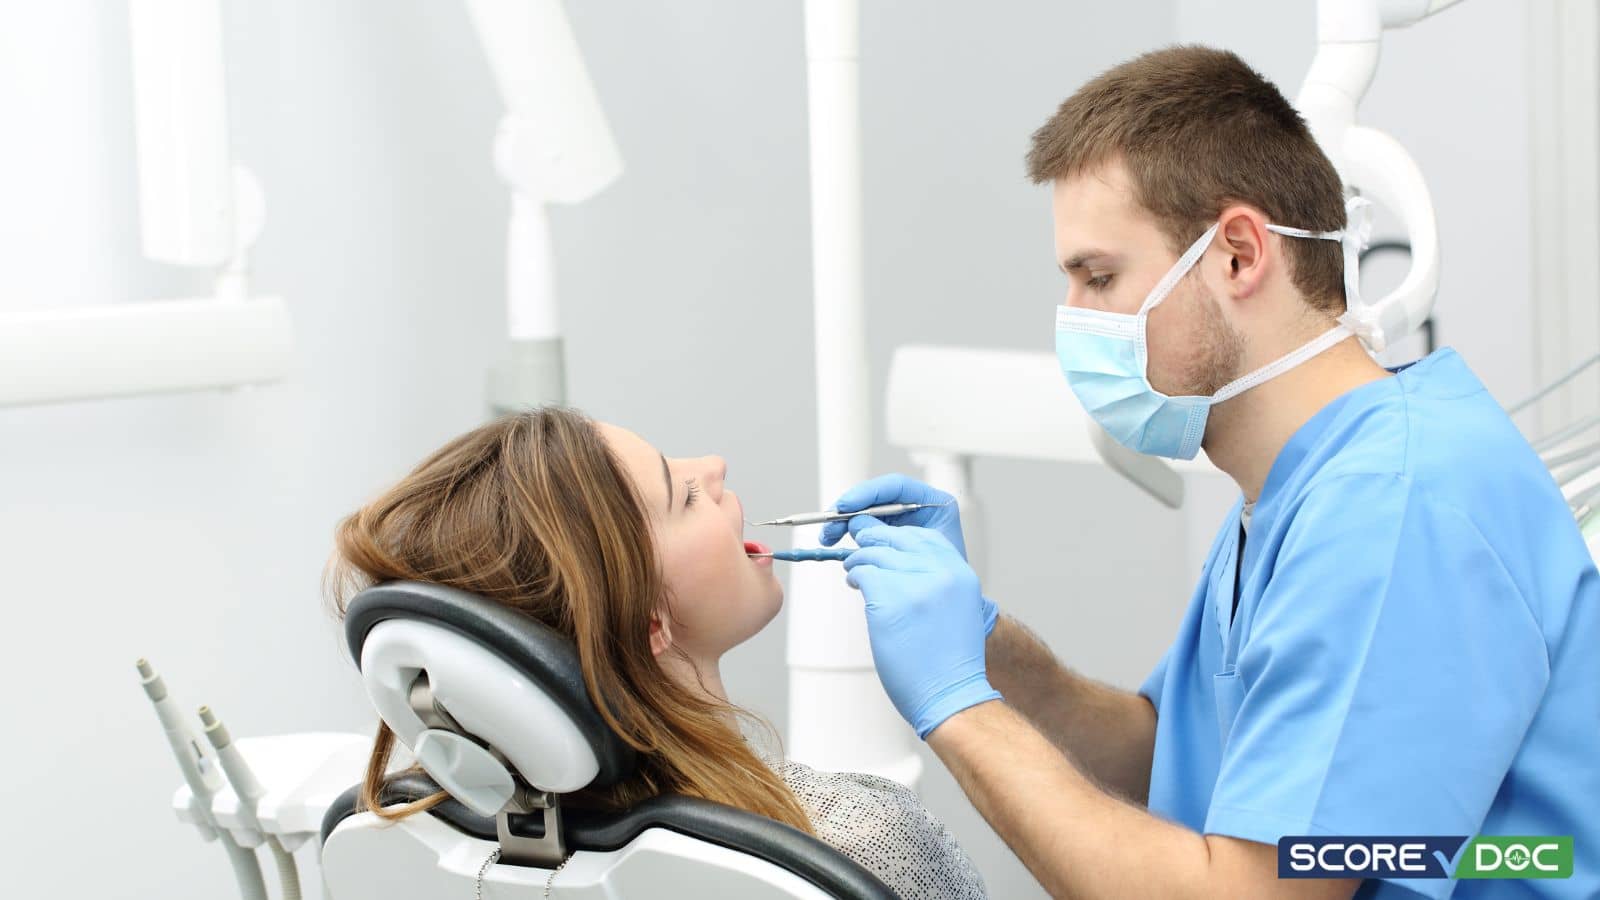 Top-Rated Dentists in Scottsdale, AZ